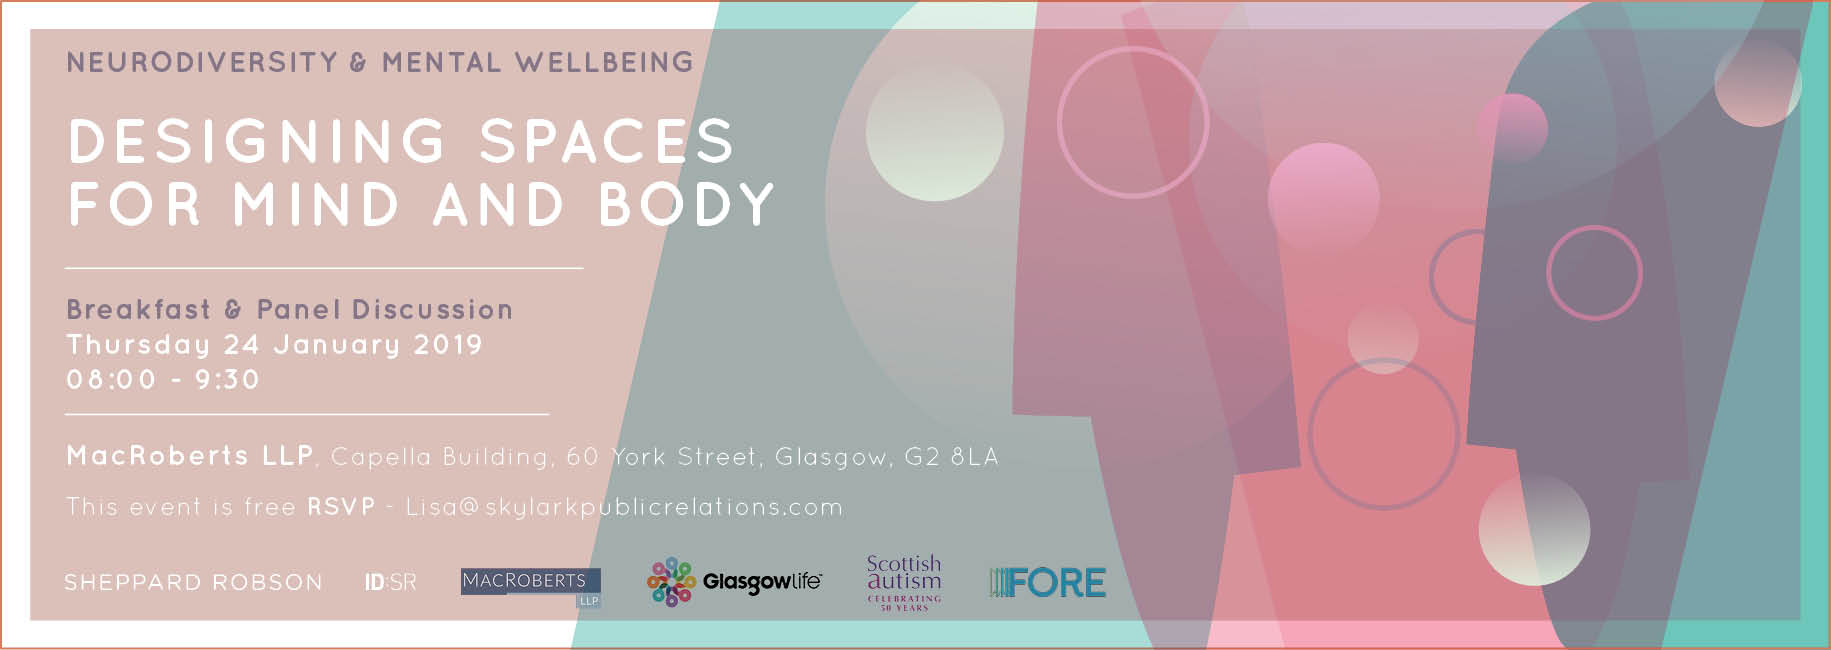 Sheppard Robson and MacRoberts announce new wellbeing series event